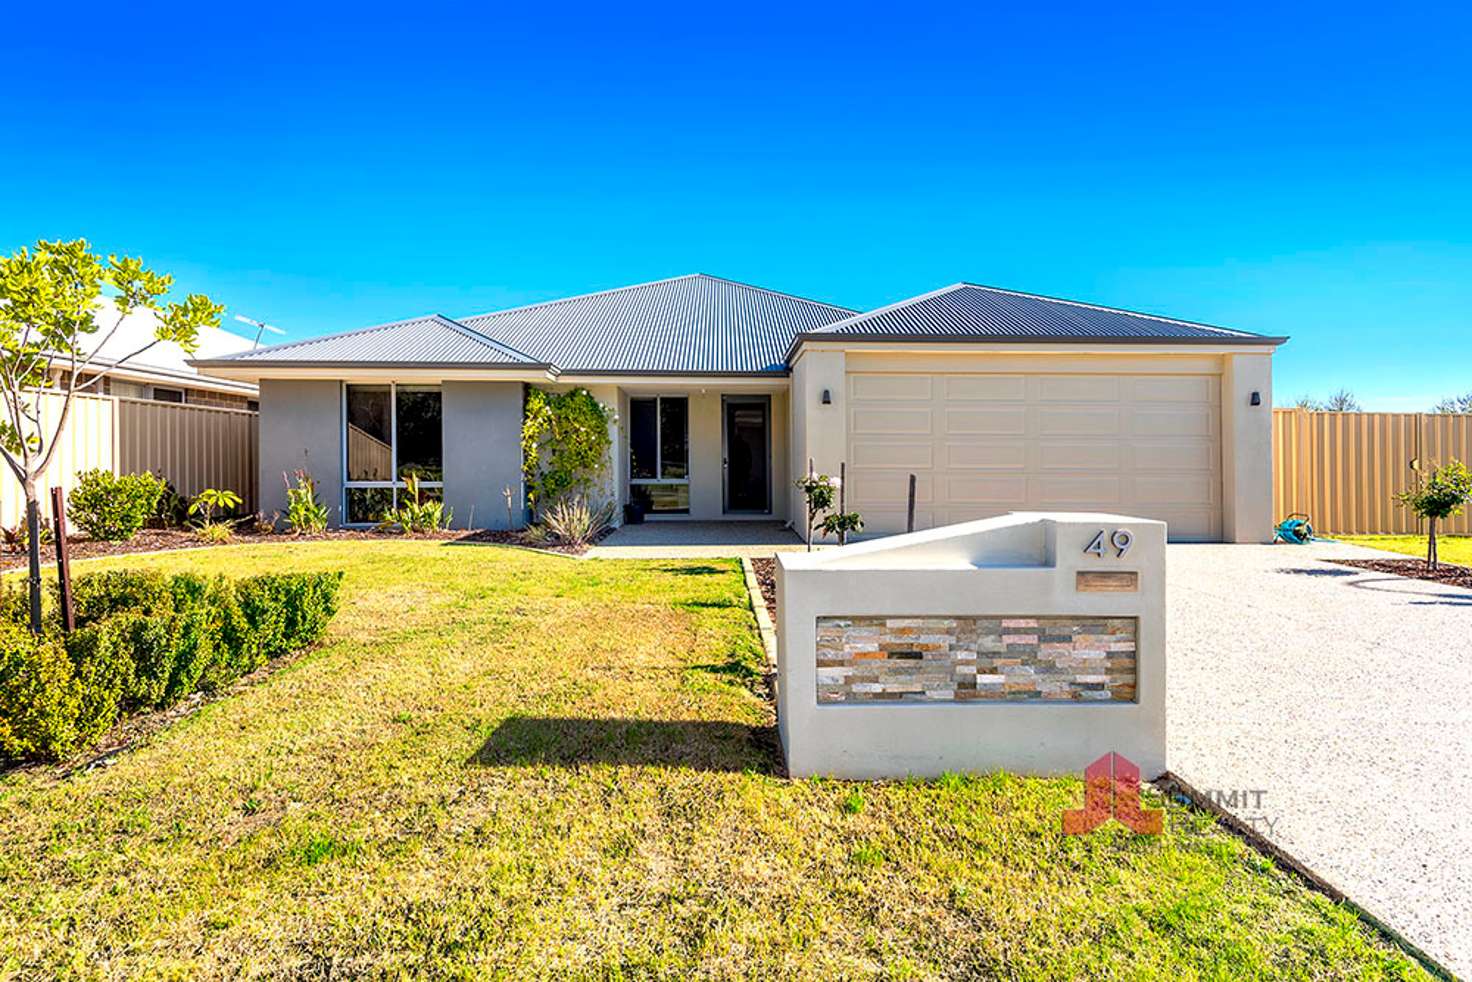 Main view of Homely house listing, 49 Waterford Way, Australind WA 6233